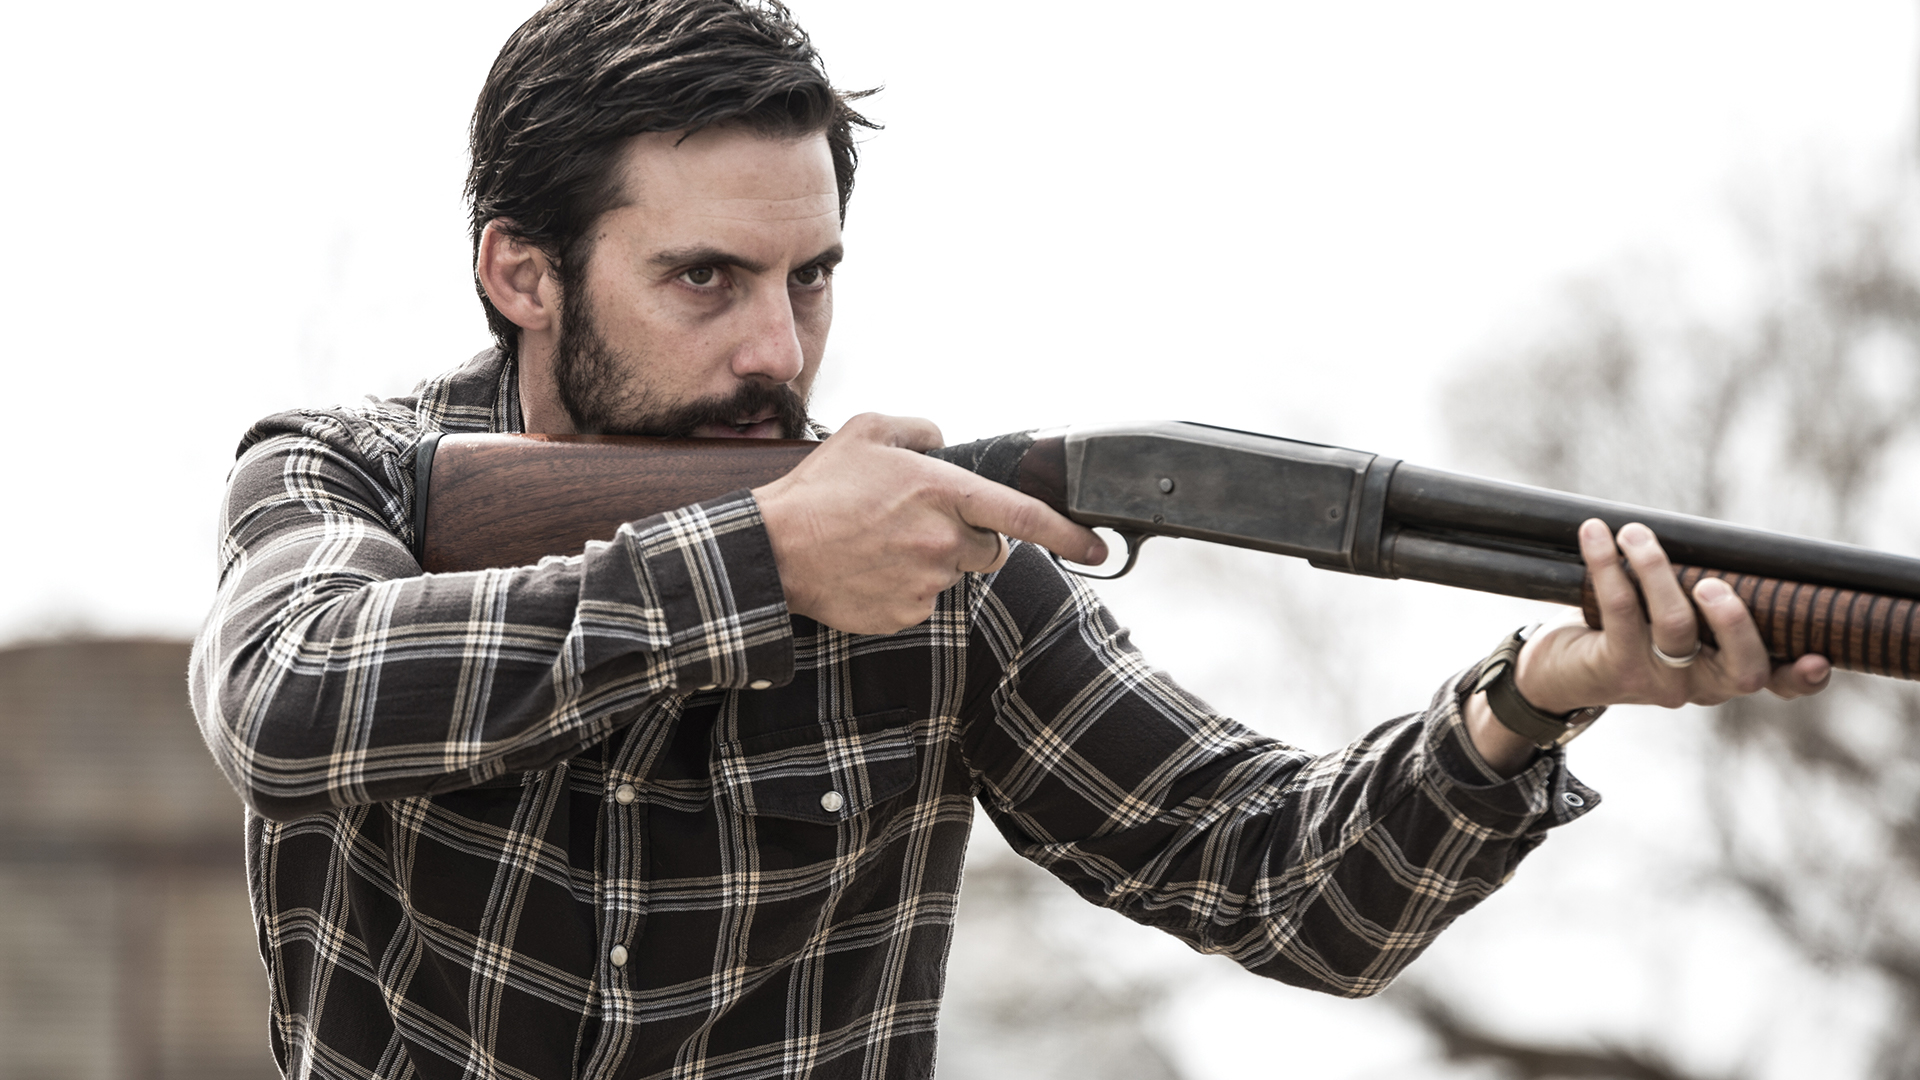 Milo Ventimiglia stars as the mysterious Jackson Pritchard living on the outskirts of Devil's Gate. Film still from DEVIL'S GATE. Photo credit: David Bukach.